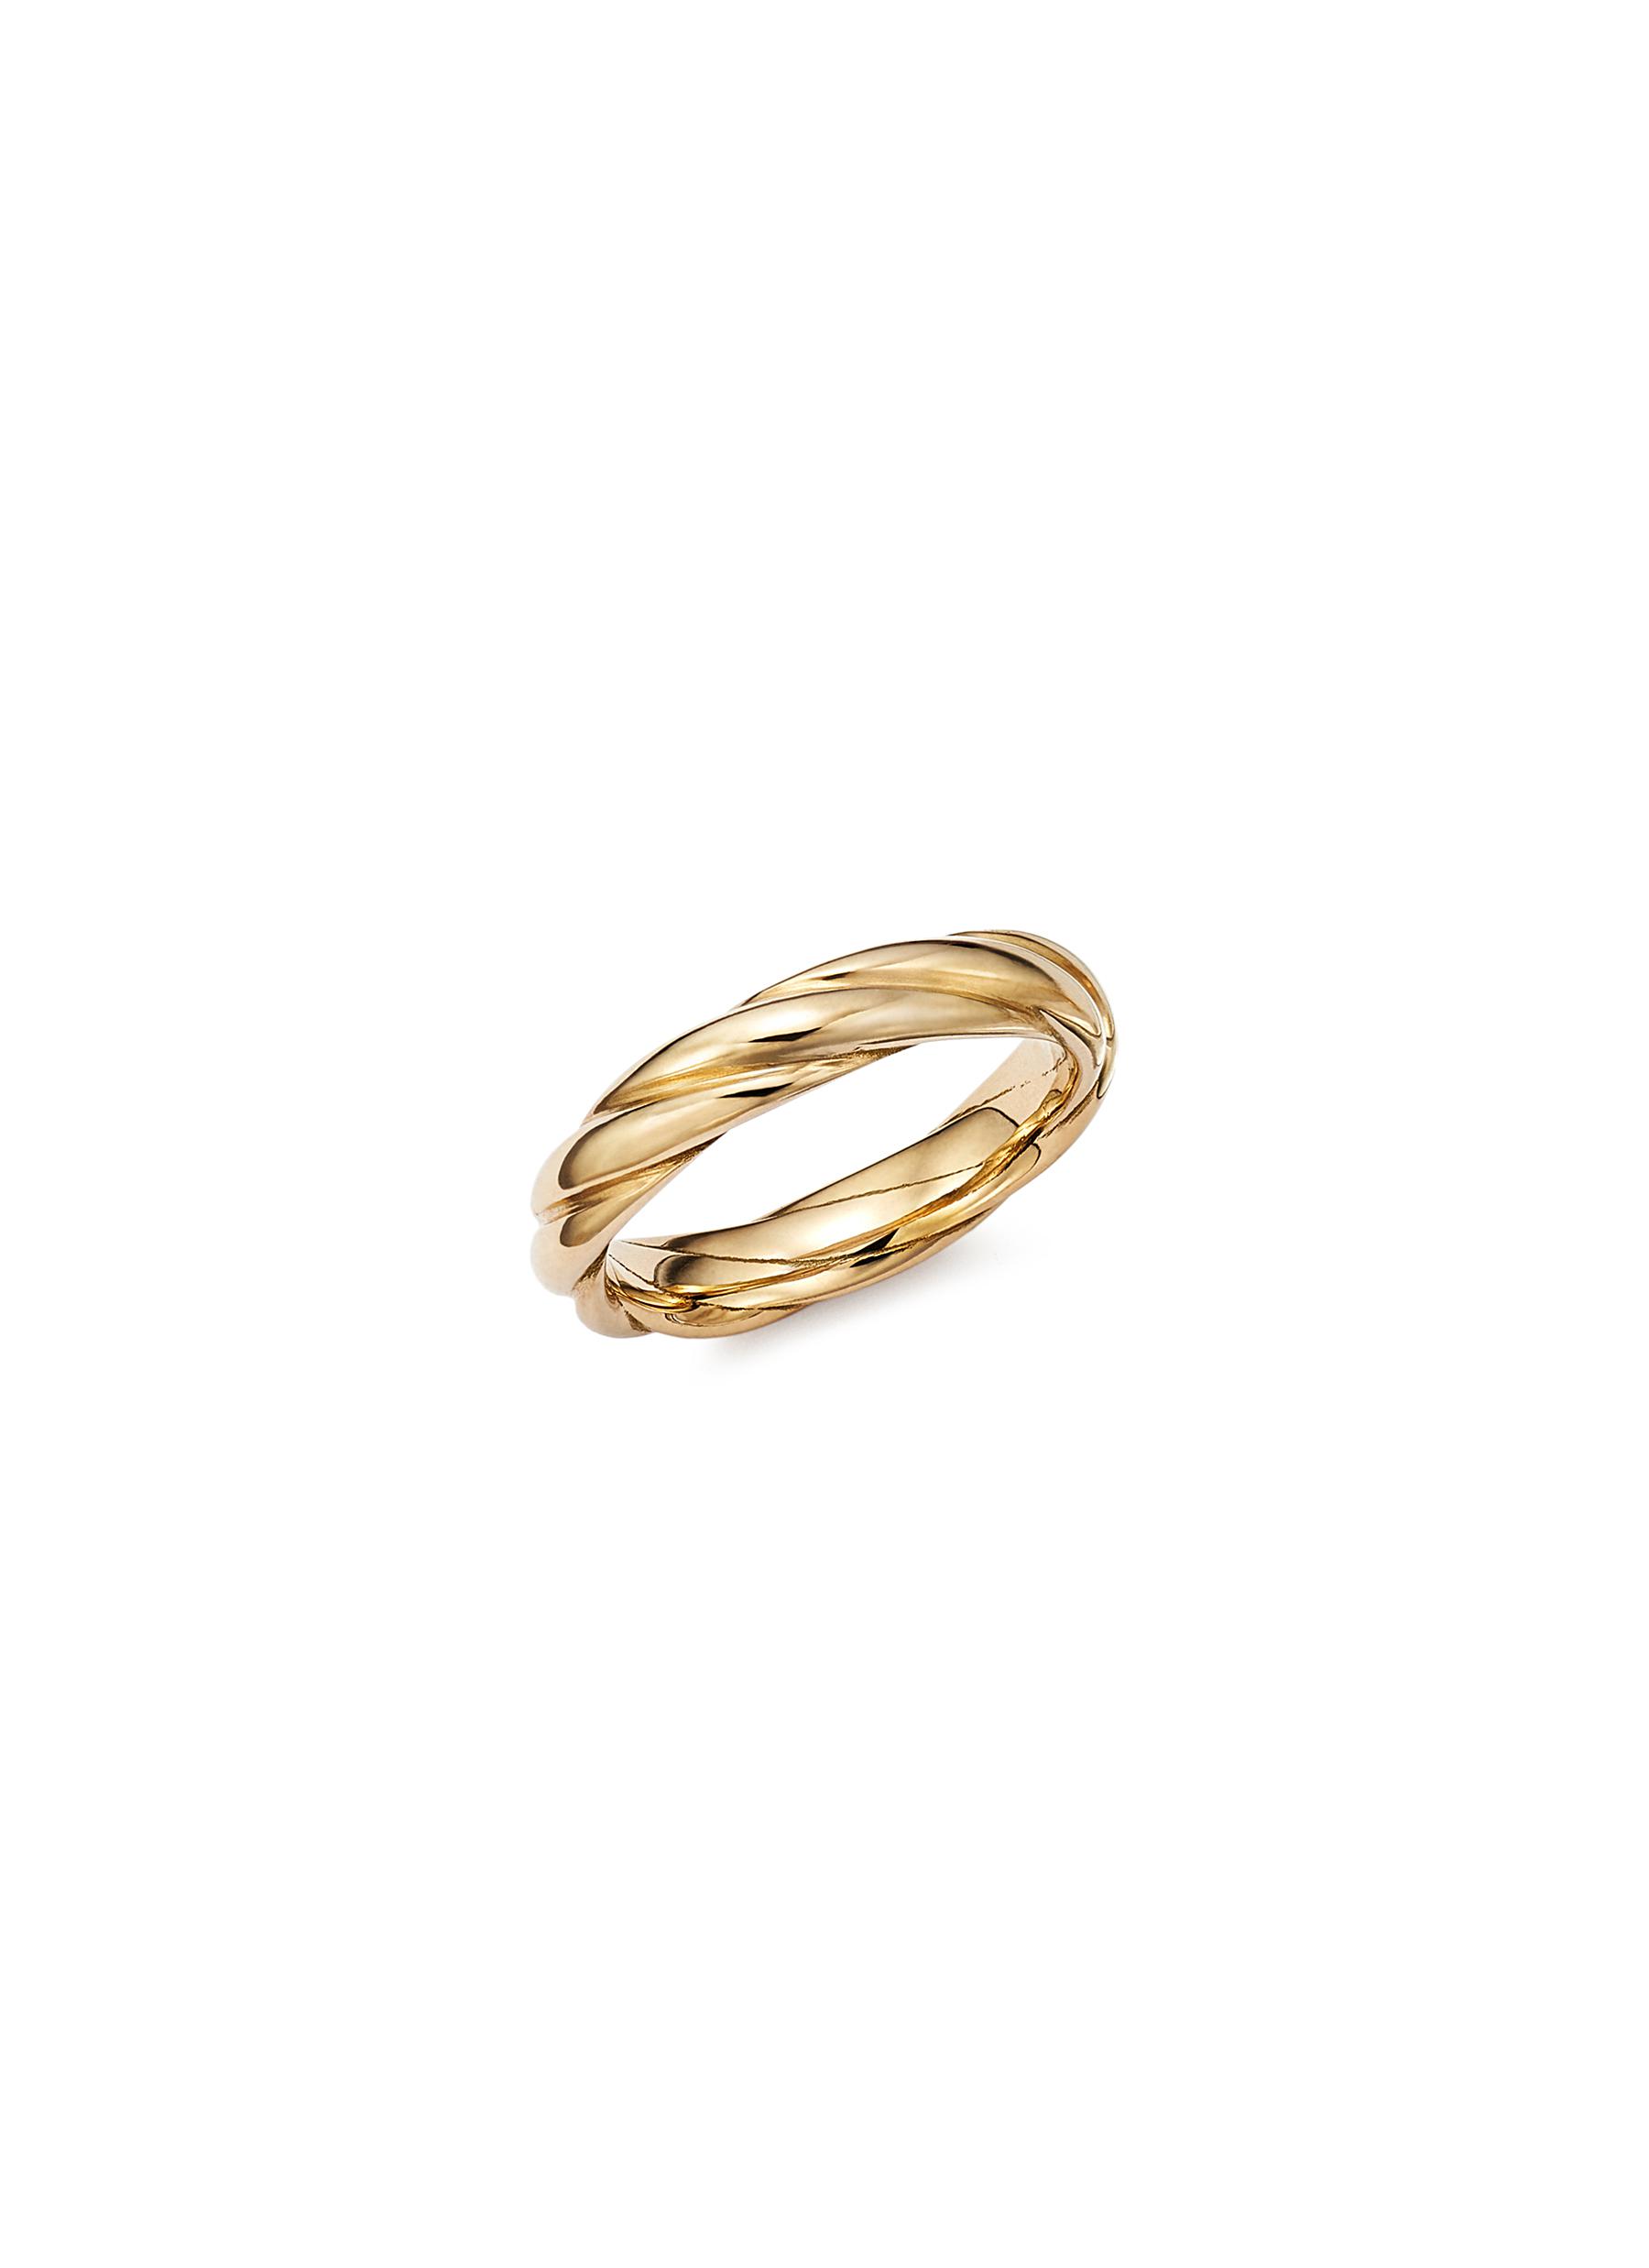 FUTURA 'TENDERNESS' 18K FAIRMINED ECOLOGICAL GOLD RING